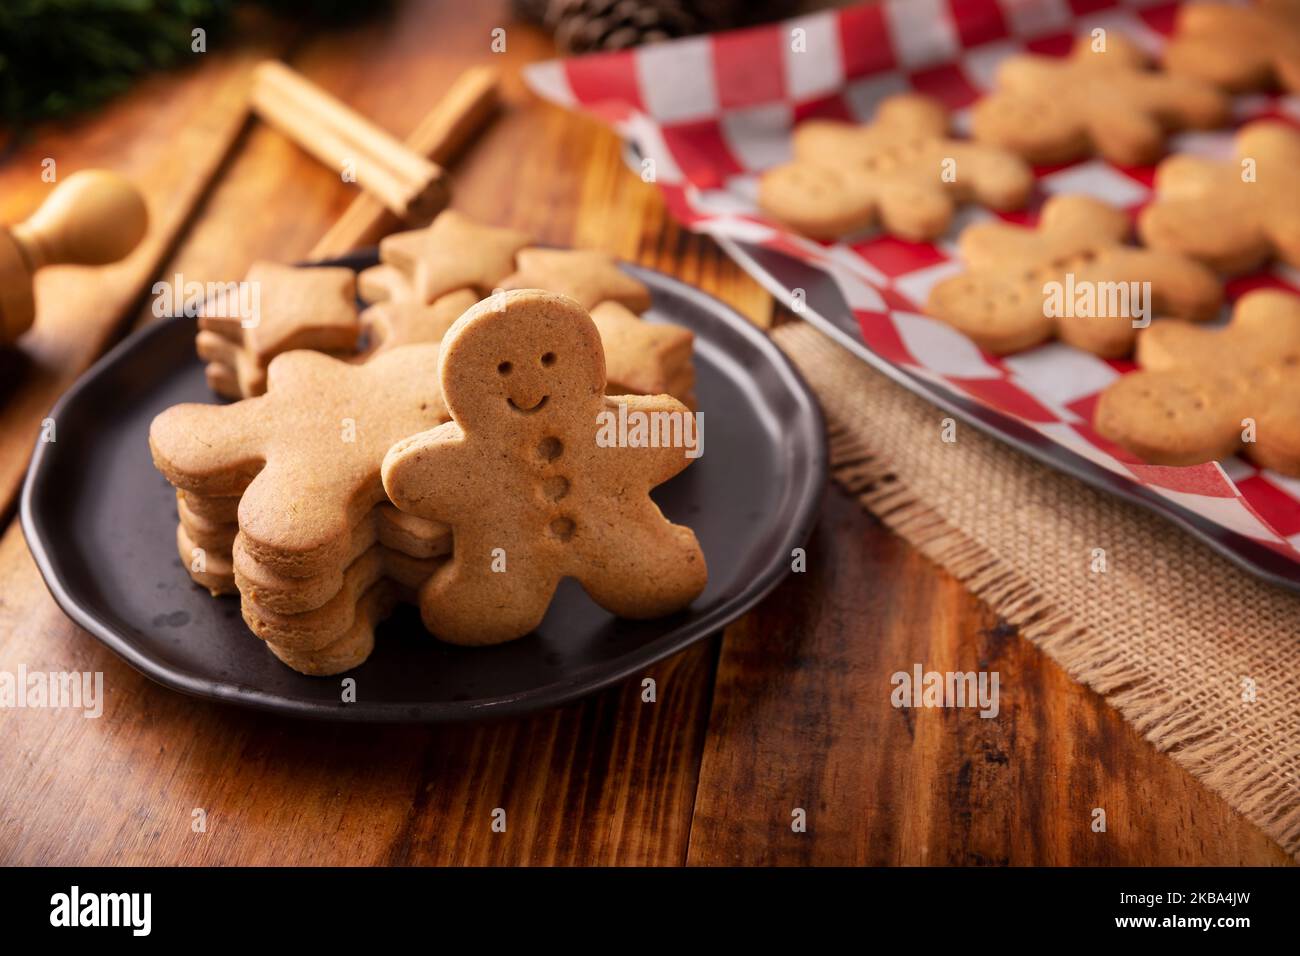 Homemade gingerbread man cookies, traditionally made at Christmas and the holidays. Stock Photo